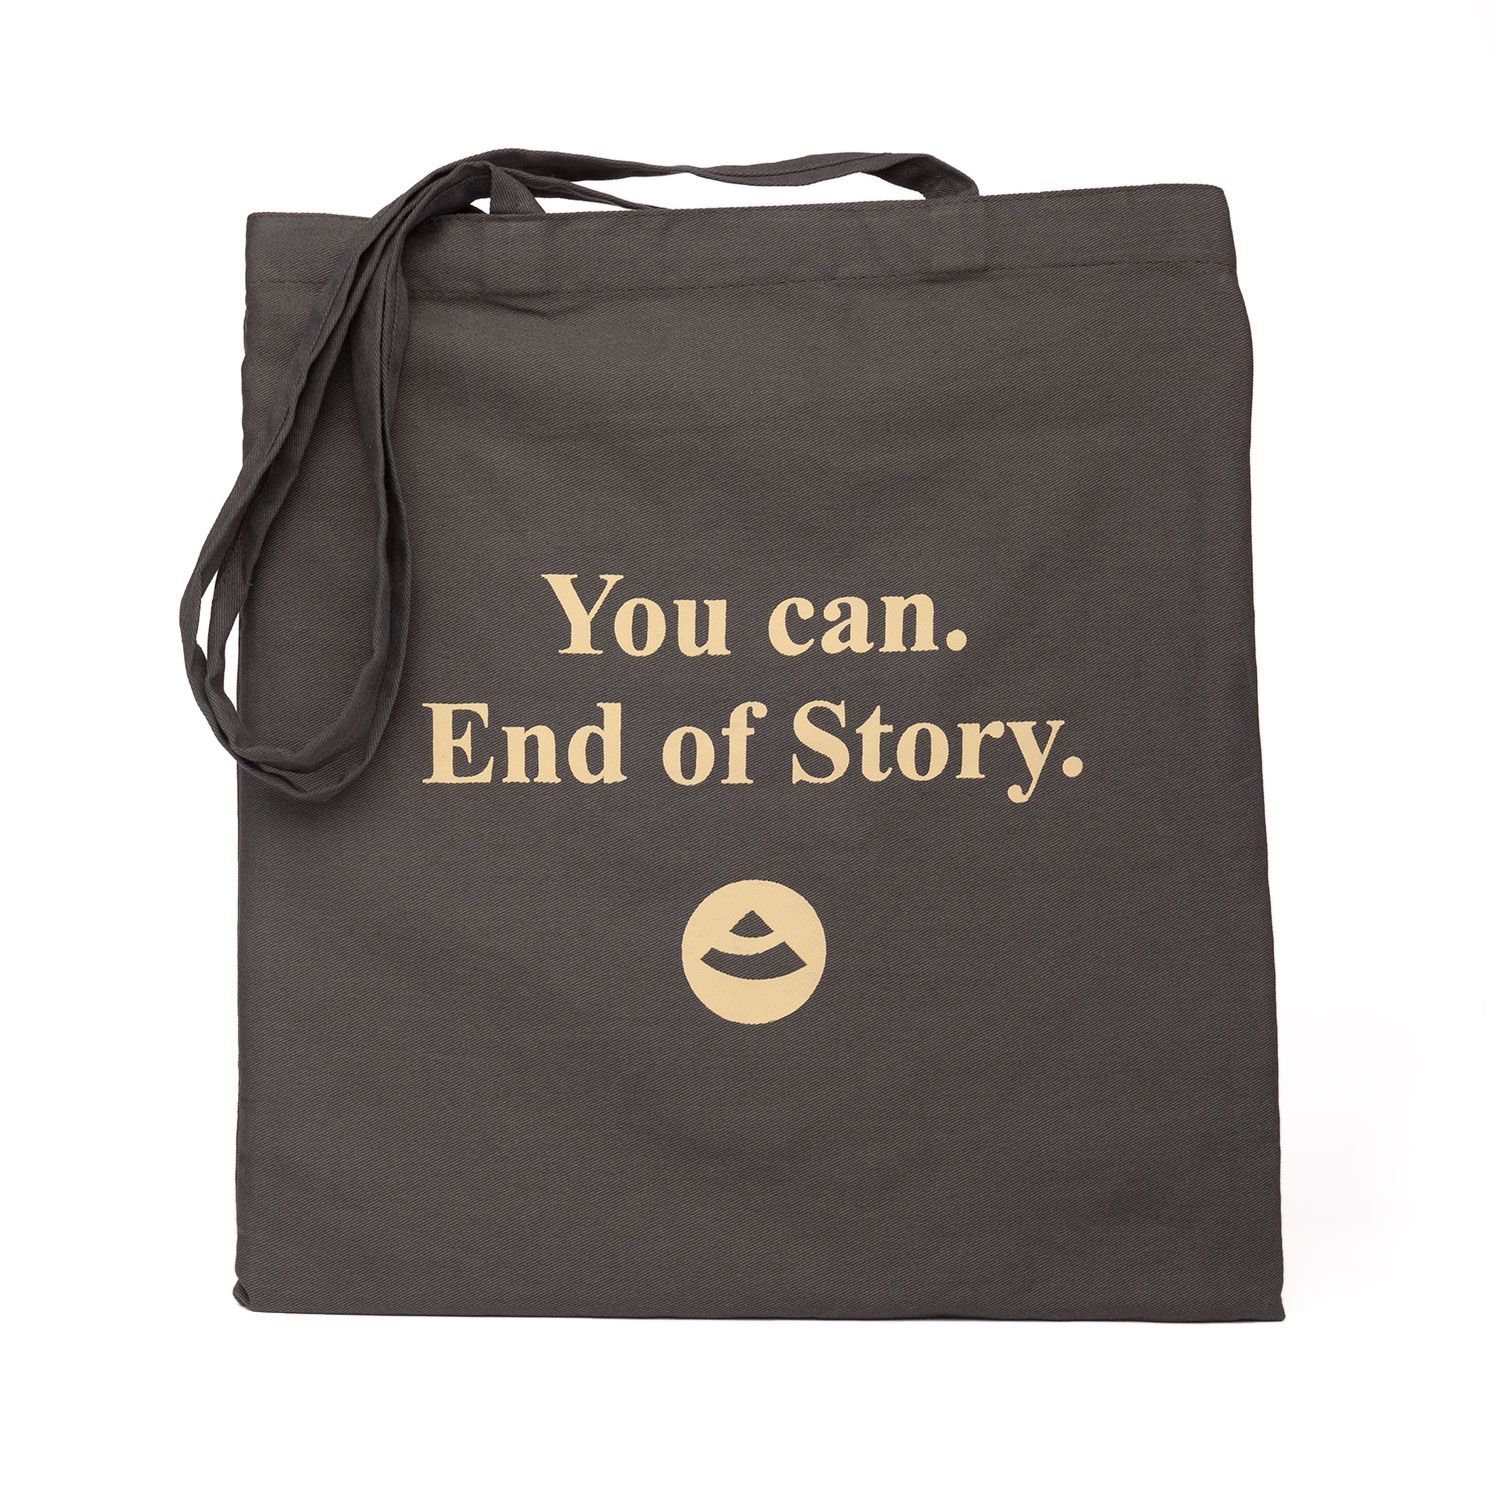 Bodhi Baumwoll-Tragetasche, anthrazit, Design-Print "You can. End of Story."